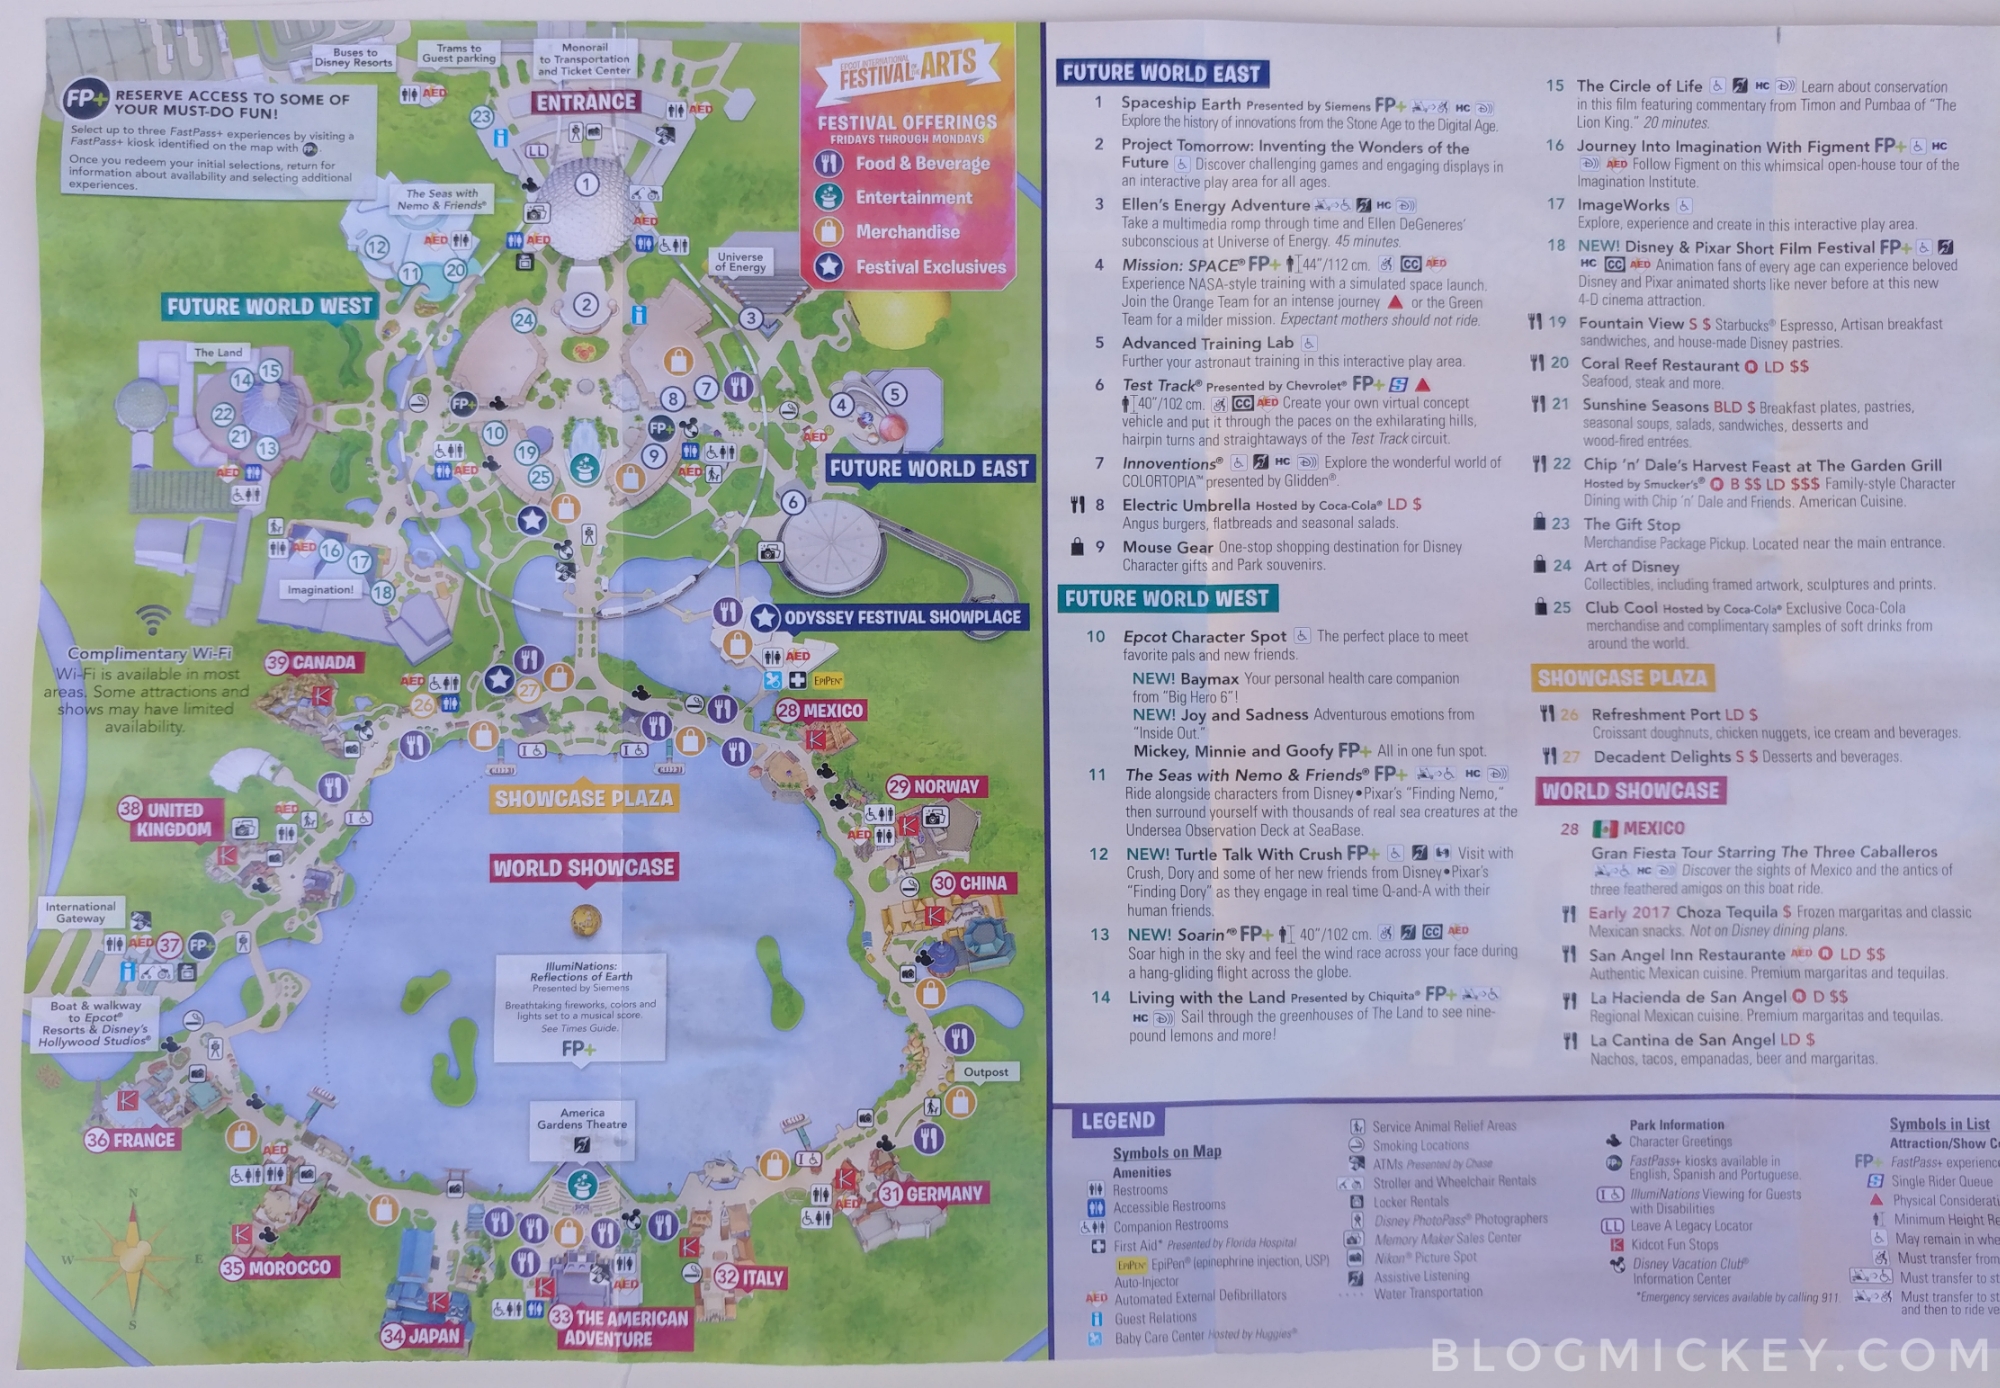 photos - epcot festival of the arts guide map - blog mickey